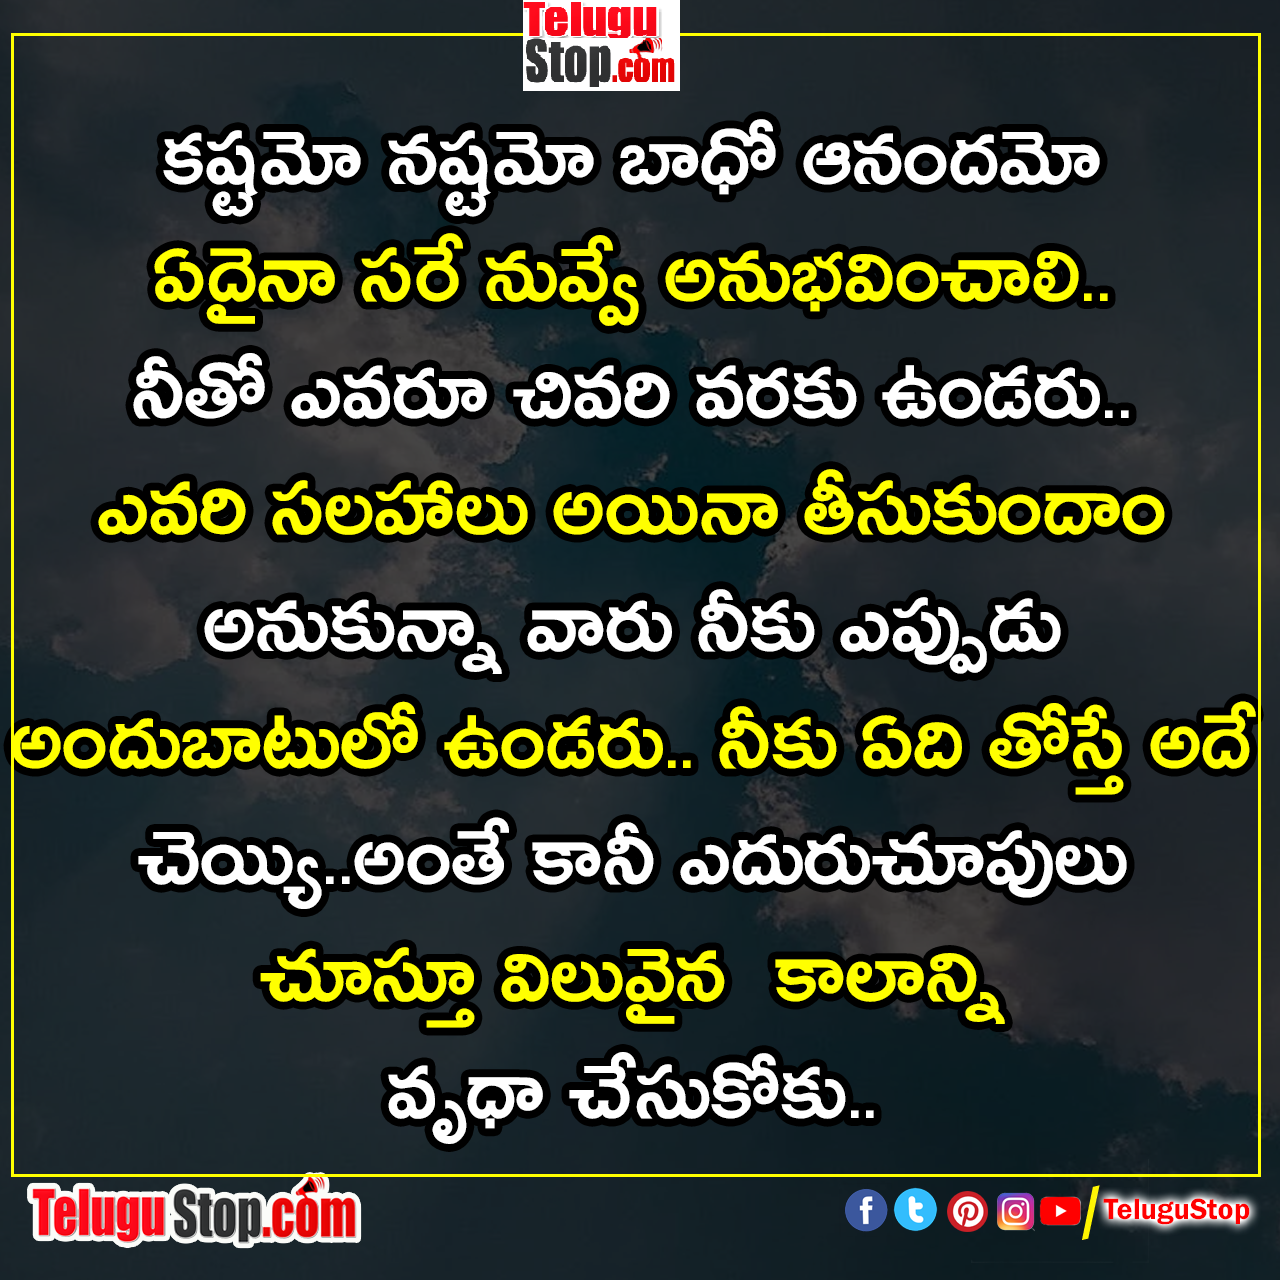 Not to waste precious time quotes in telugu inspirational quotes